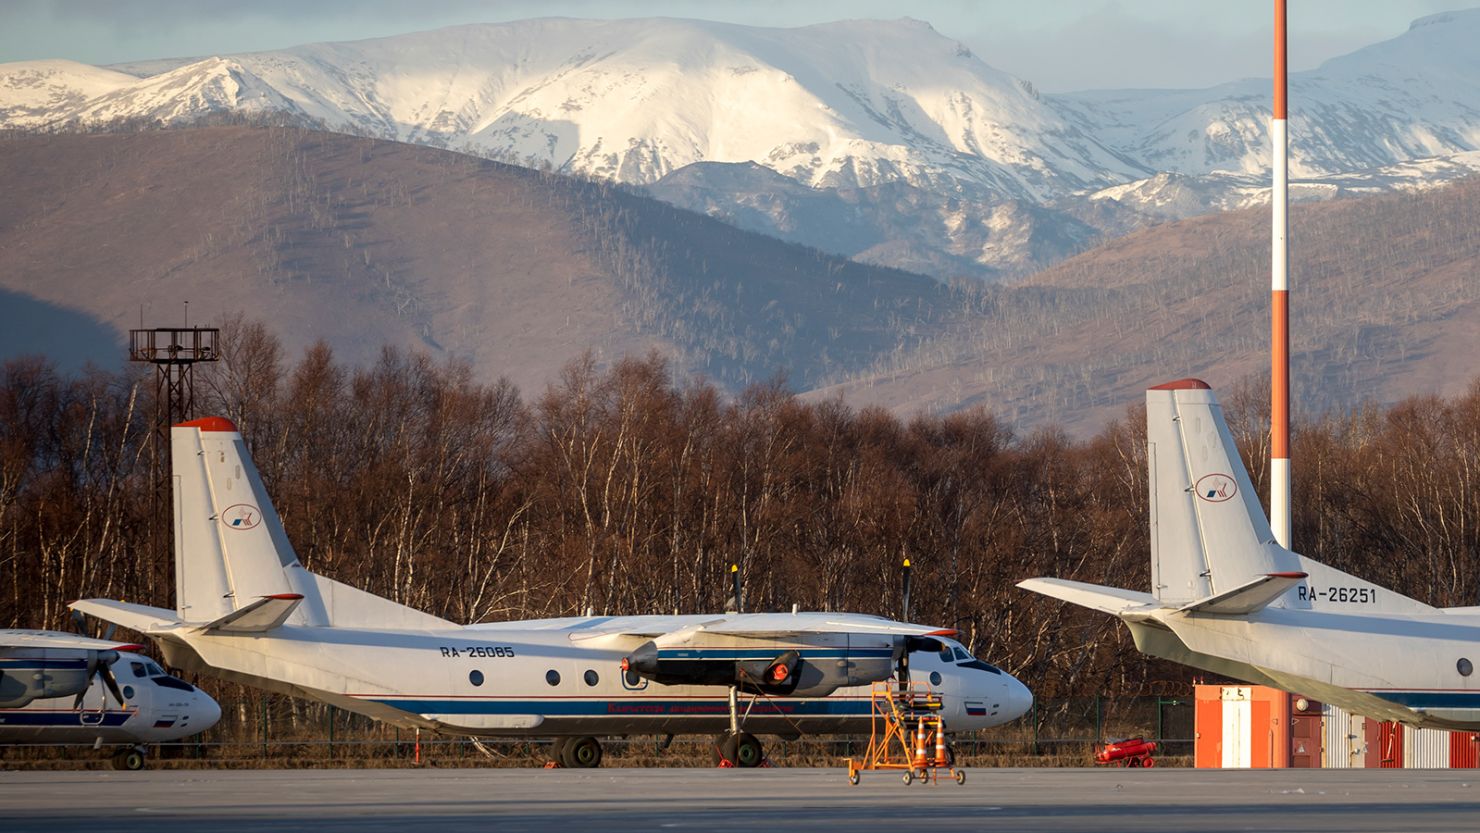 A file photo of an Antonov An-26 twin-engined turboprop, with the same RA-26085 tail number as the missing plane, at an airport outside Petropavlovsk-Kamchatsky, Russia, in November 2020.